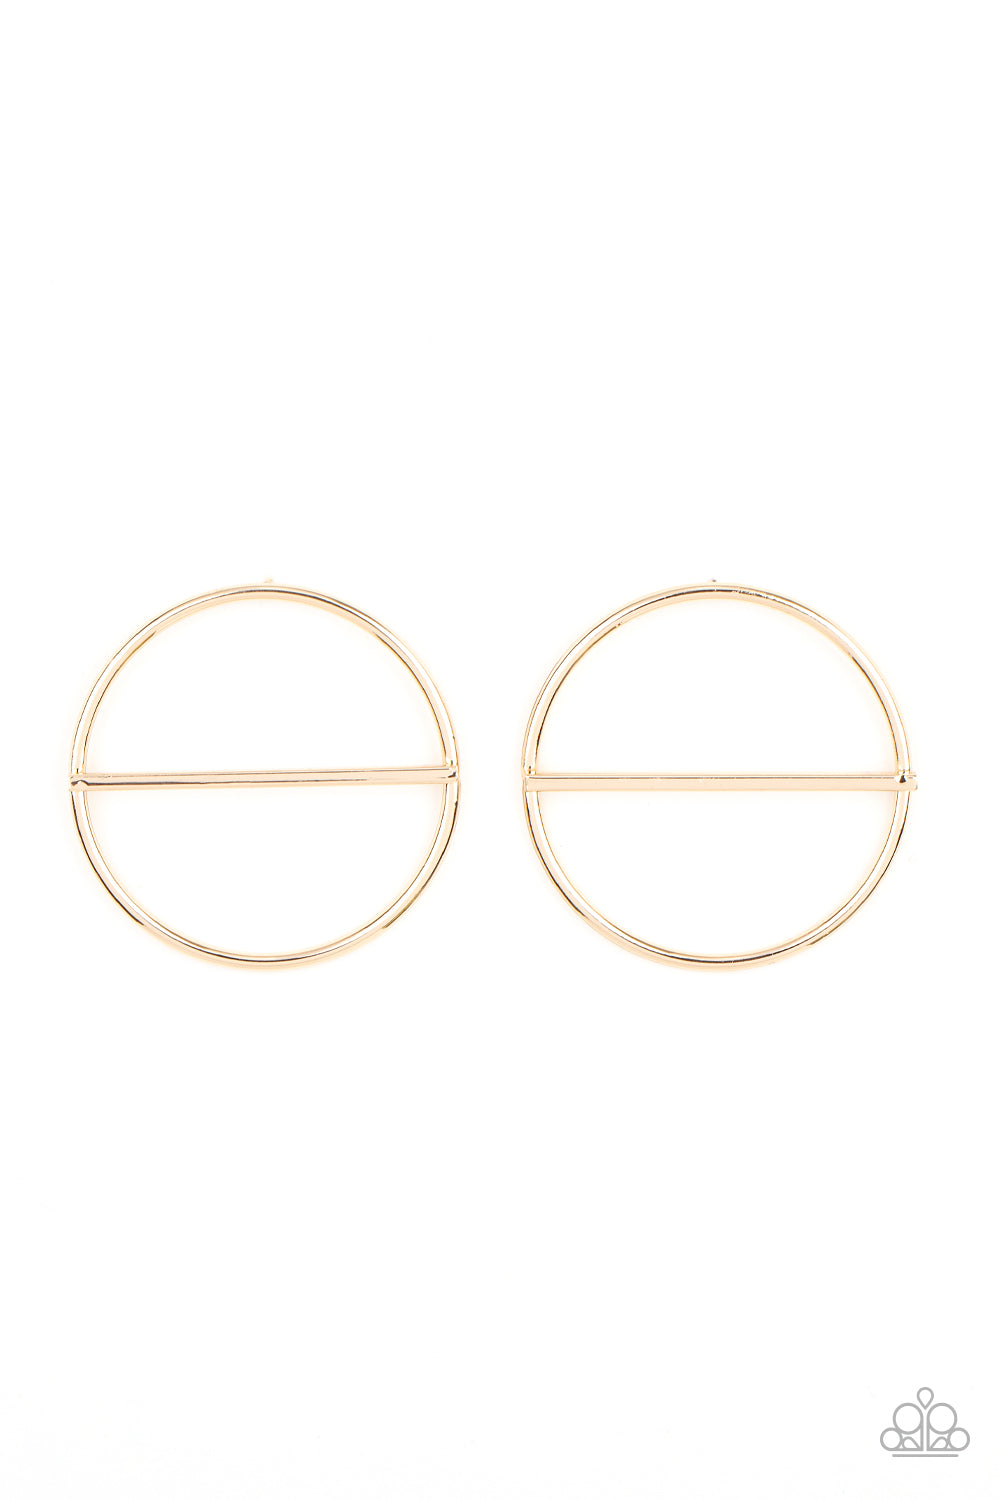 Paparazzi Accessories - Dynamic Diameter - Gold Earrings a glistening gold bar runs horizontally across the center of an oversized gold hoop, adding a timeless twist to the classic display. Earring attaches to a standard post fitting.  Sold as one pair of post earrings.